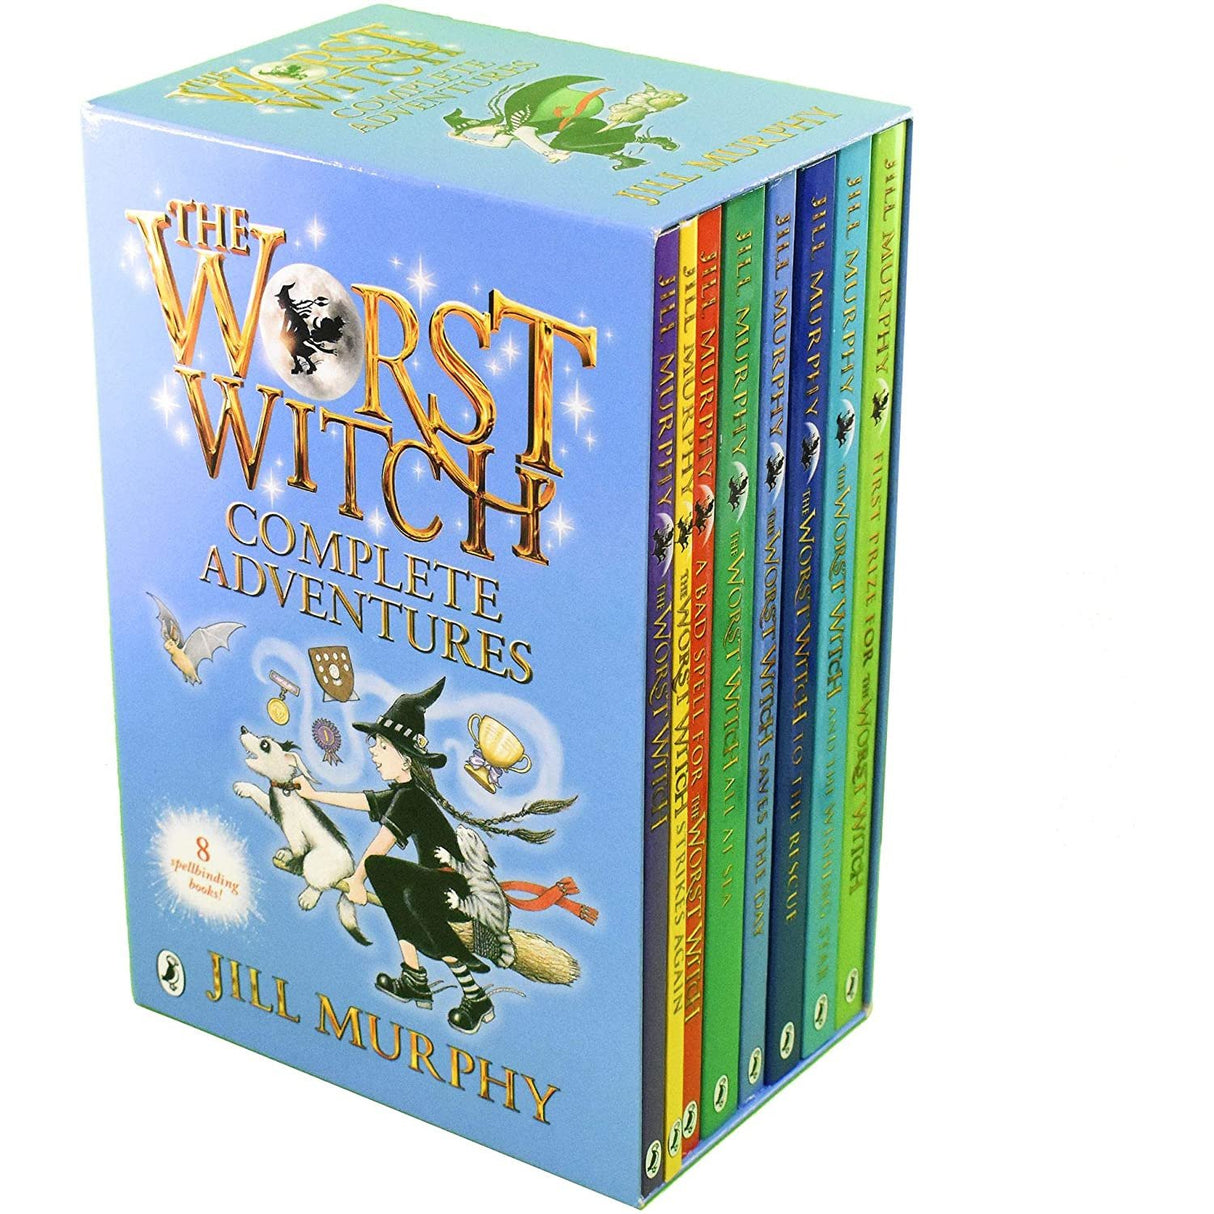 The Worst Witch - Complete Adventures